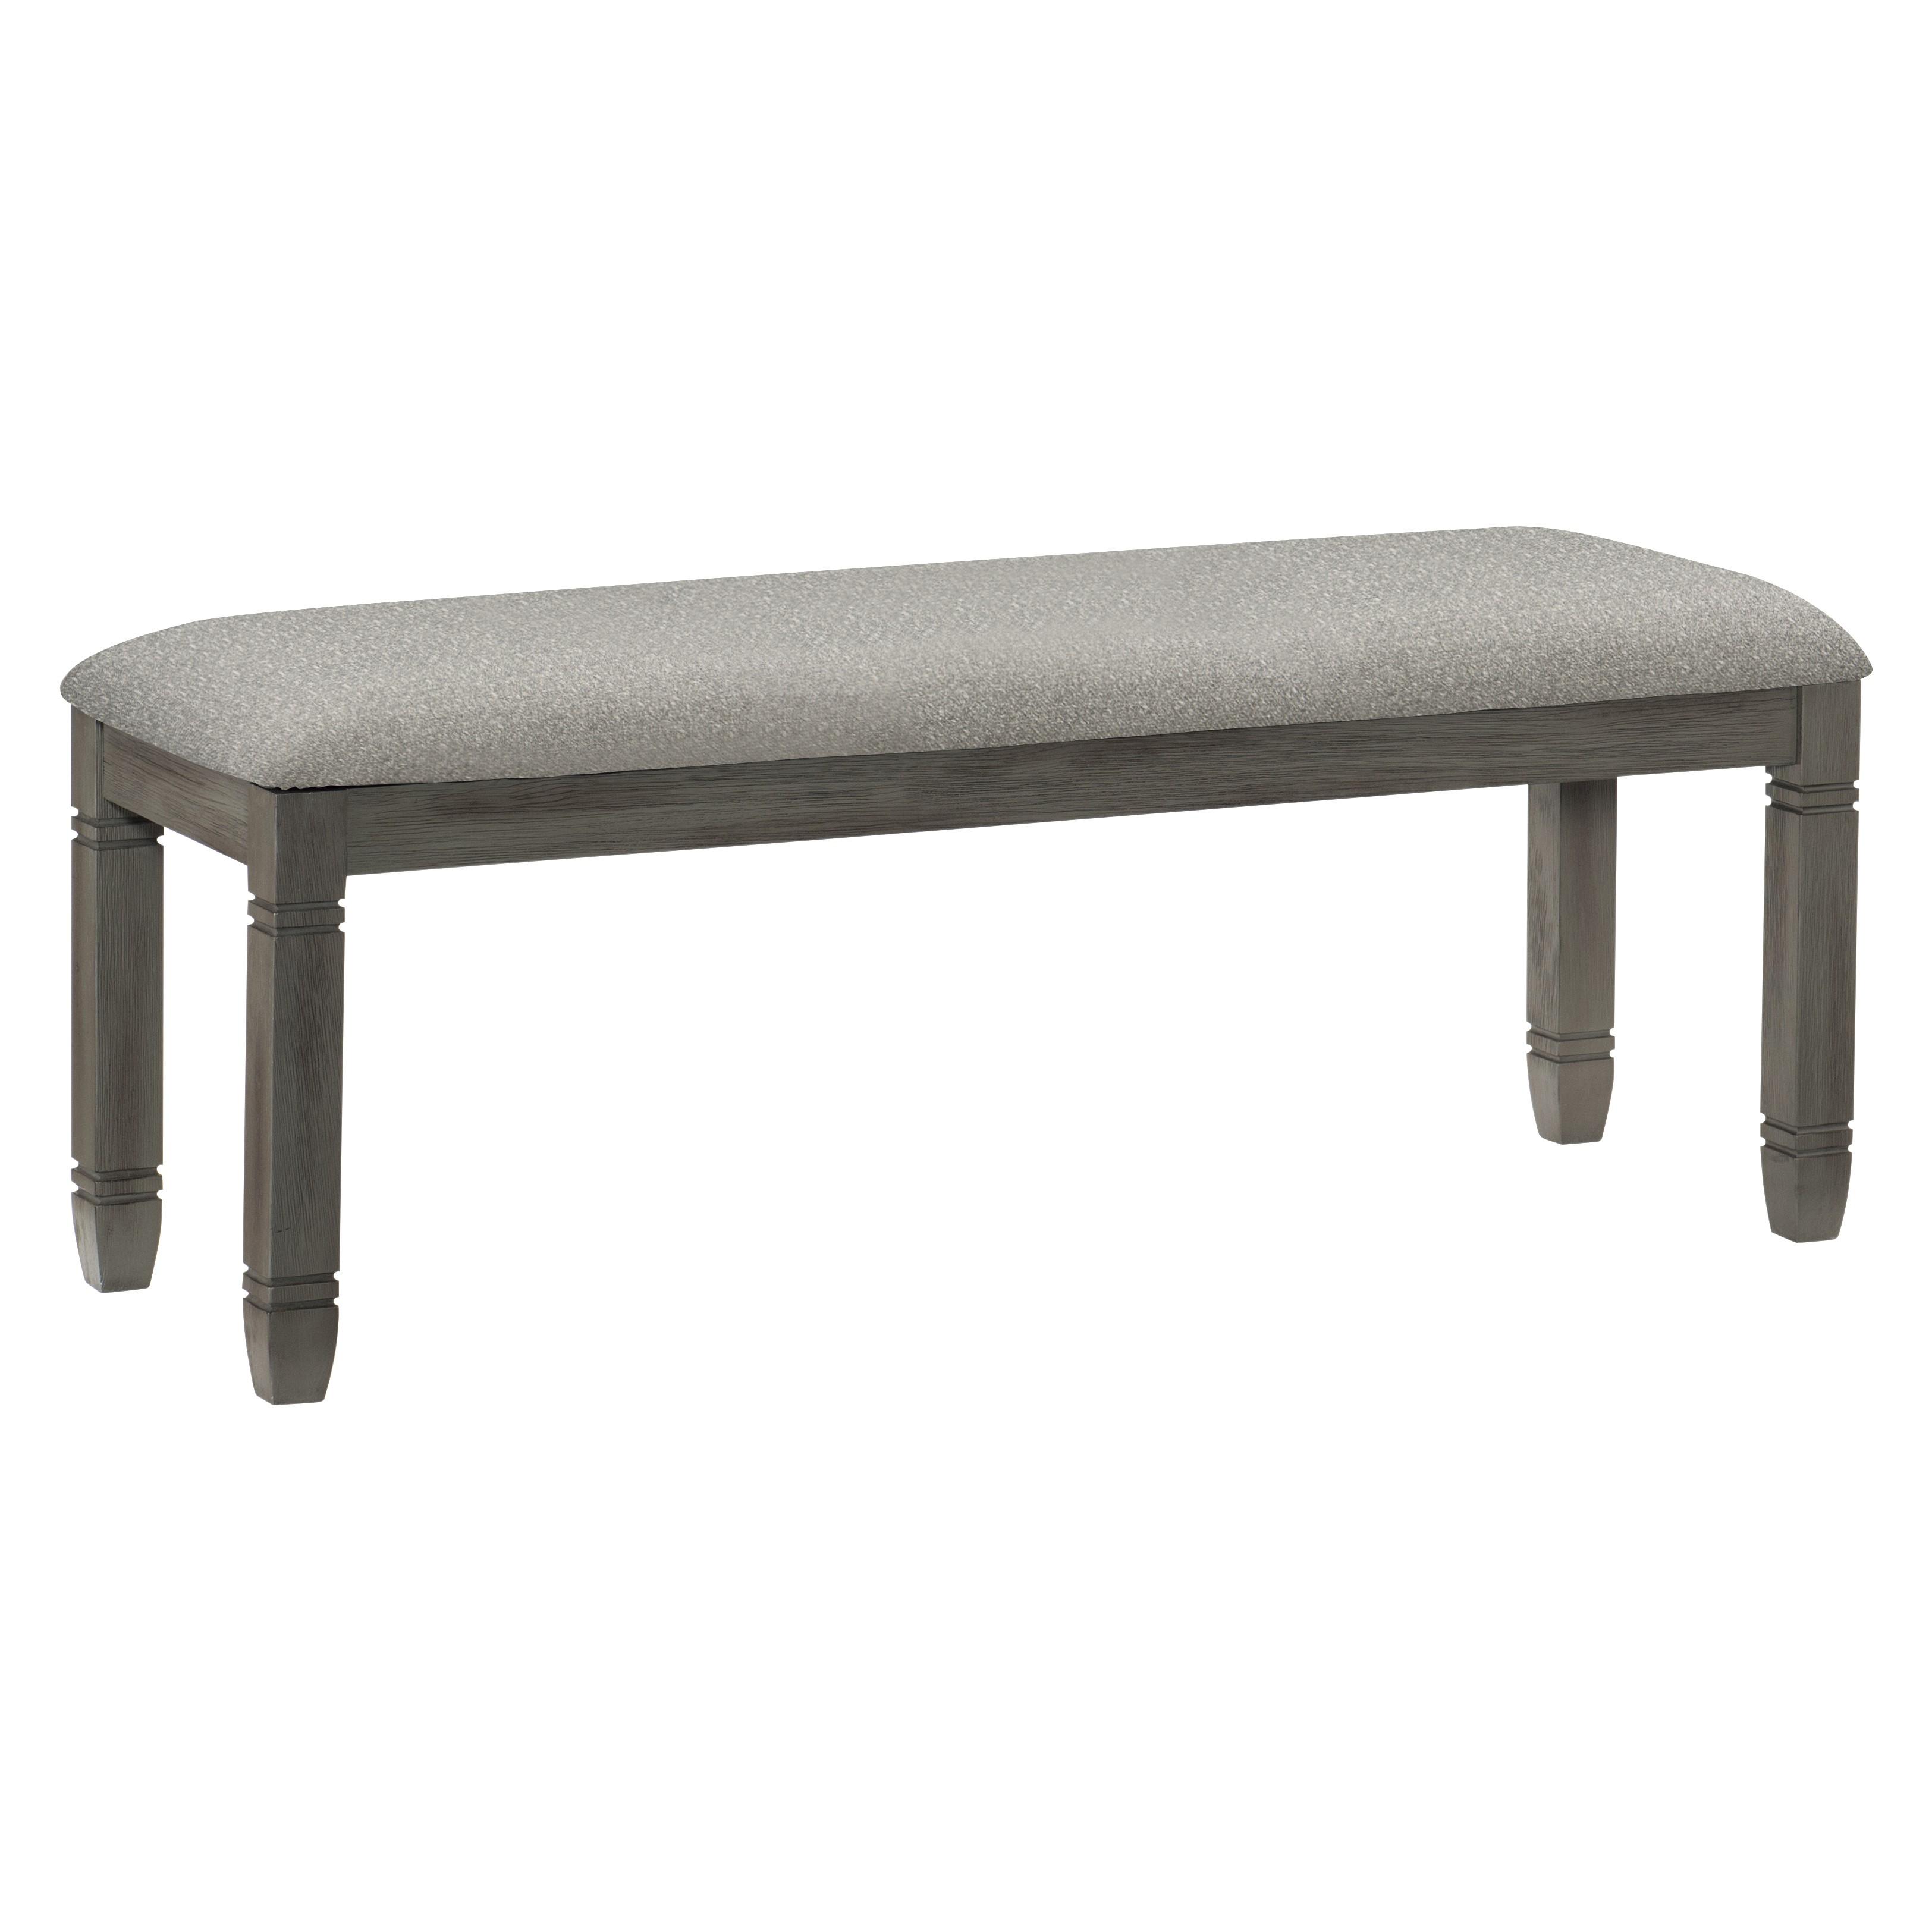 Homelegance 5627GY-13 Granby Dining Bench